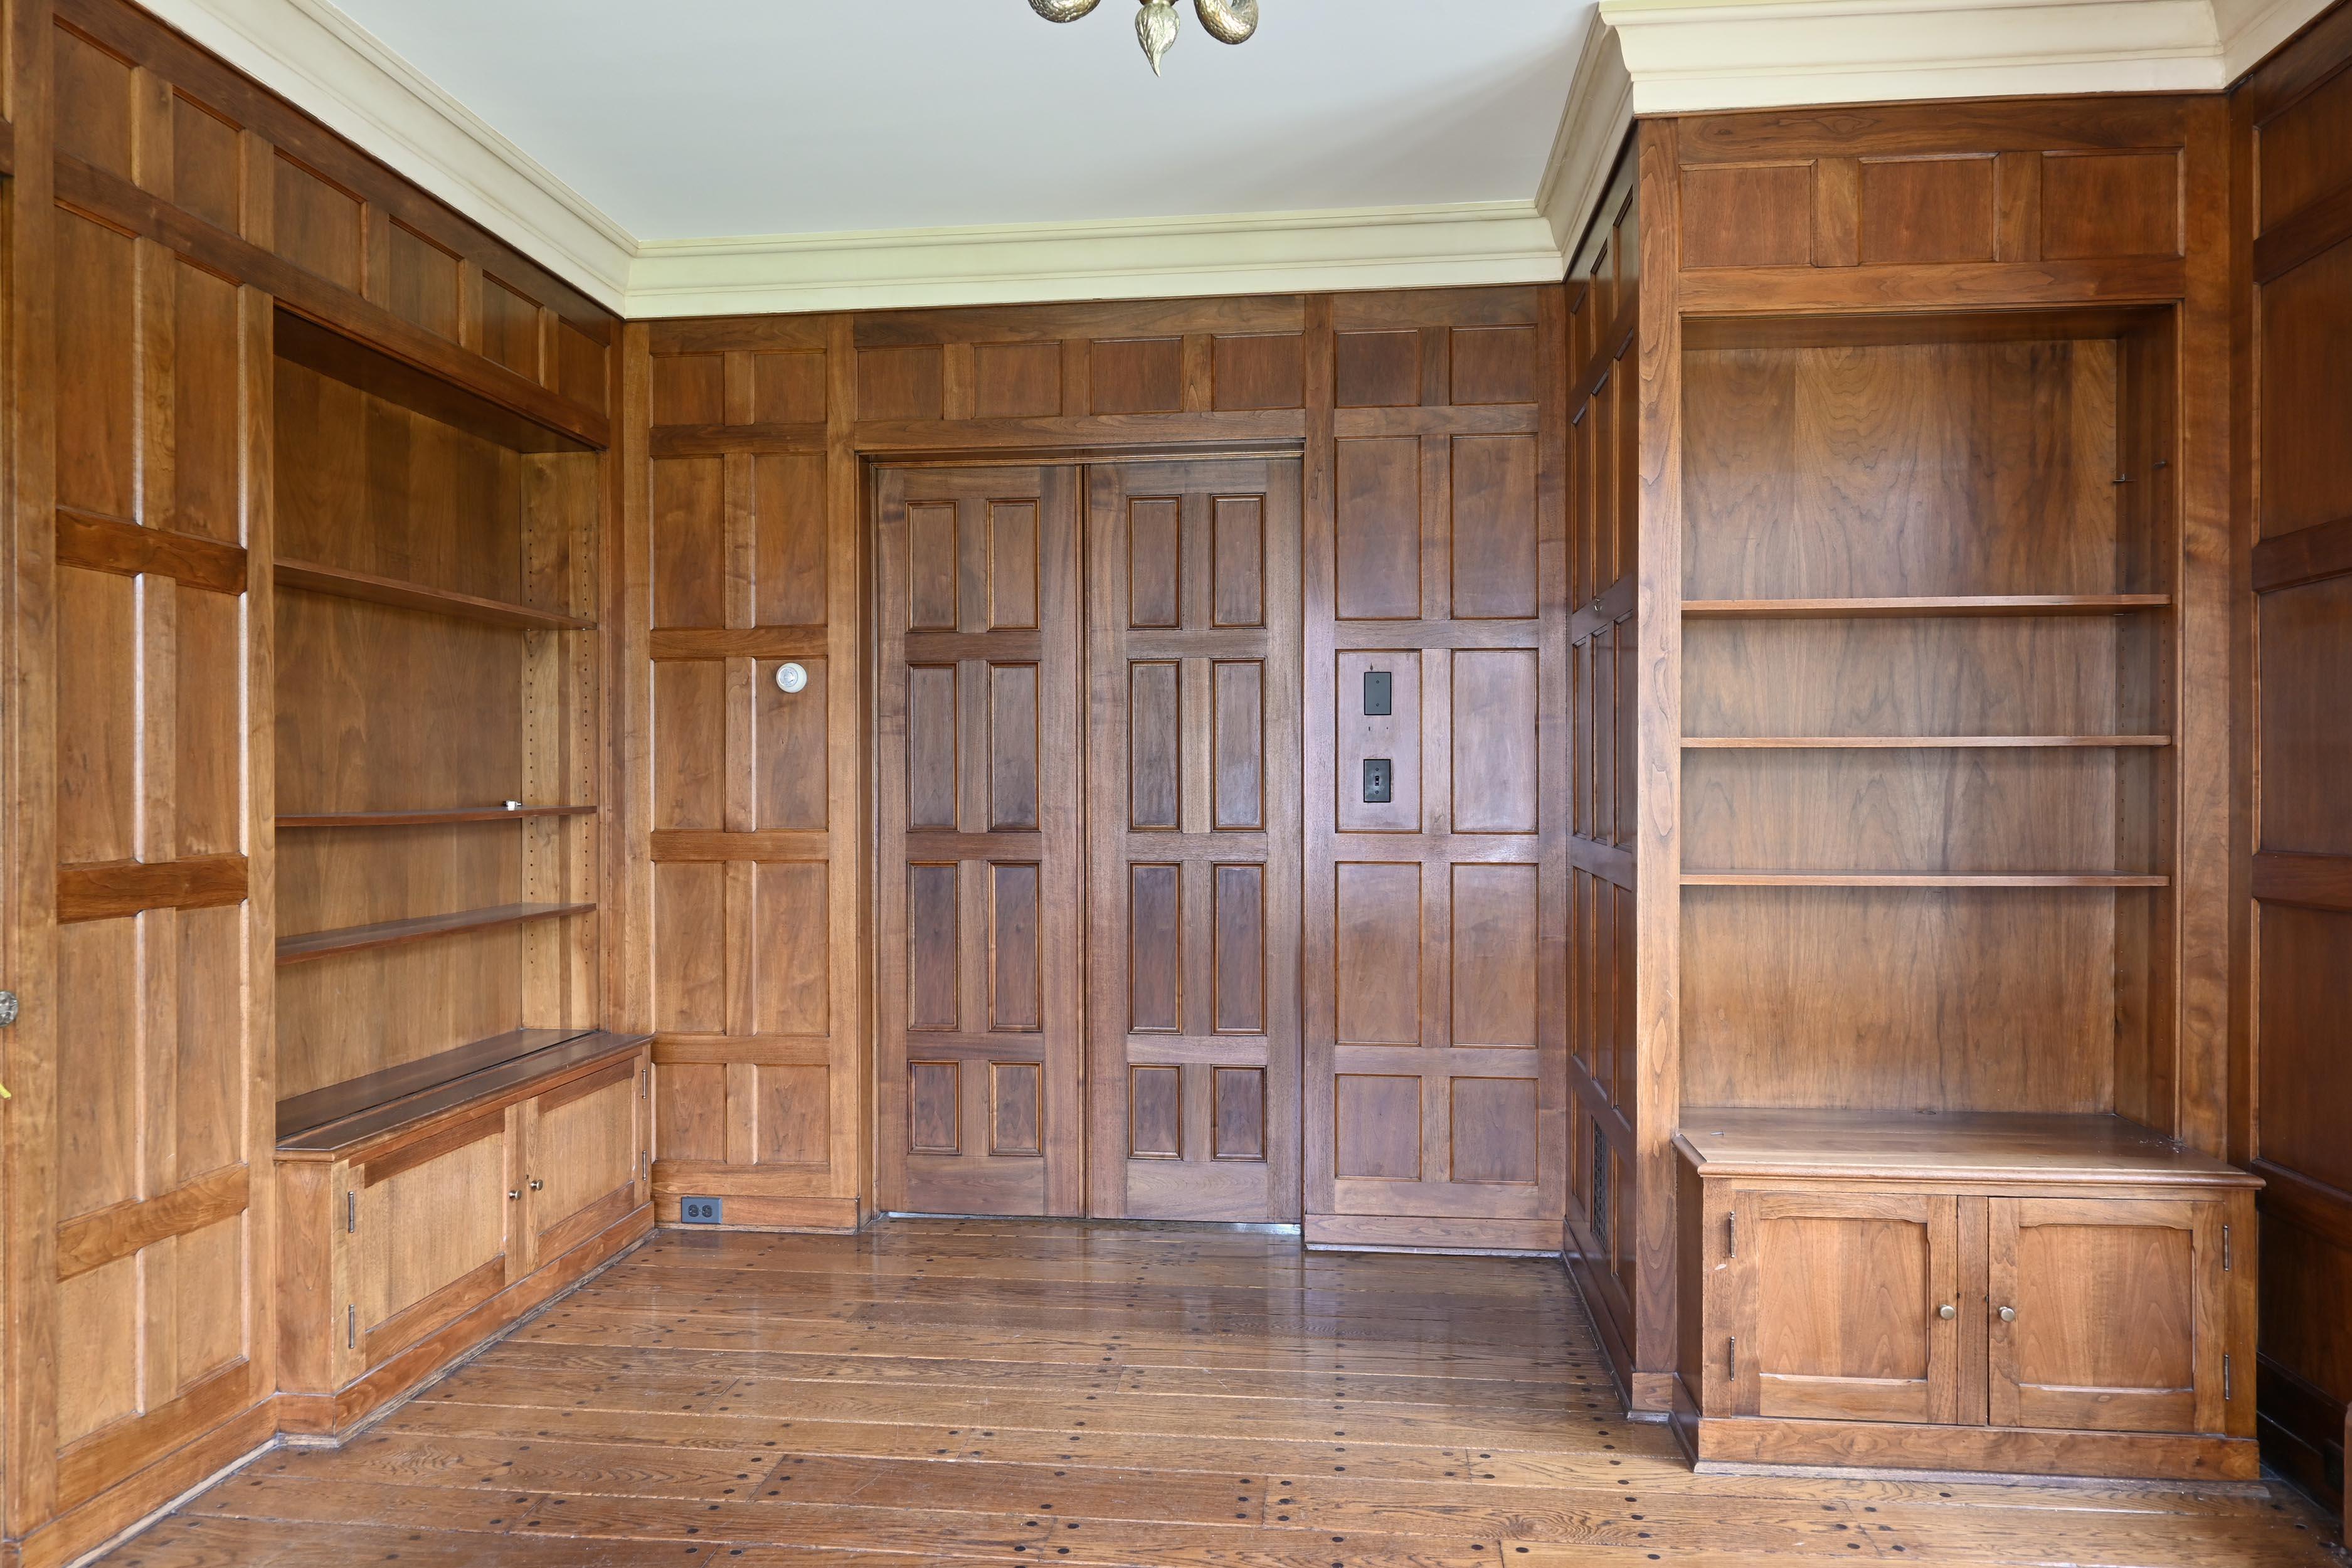 Butternut (white walnut) from a 1929 paneled complete study with bookcases, 2 doors, pocket doors & windows included.
 
AA# 61252

Circa: deconstructed from a 1929 Minneapolis Lake Home
Condition: Pristine Age Consistent wear, meticulously